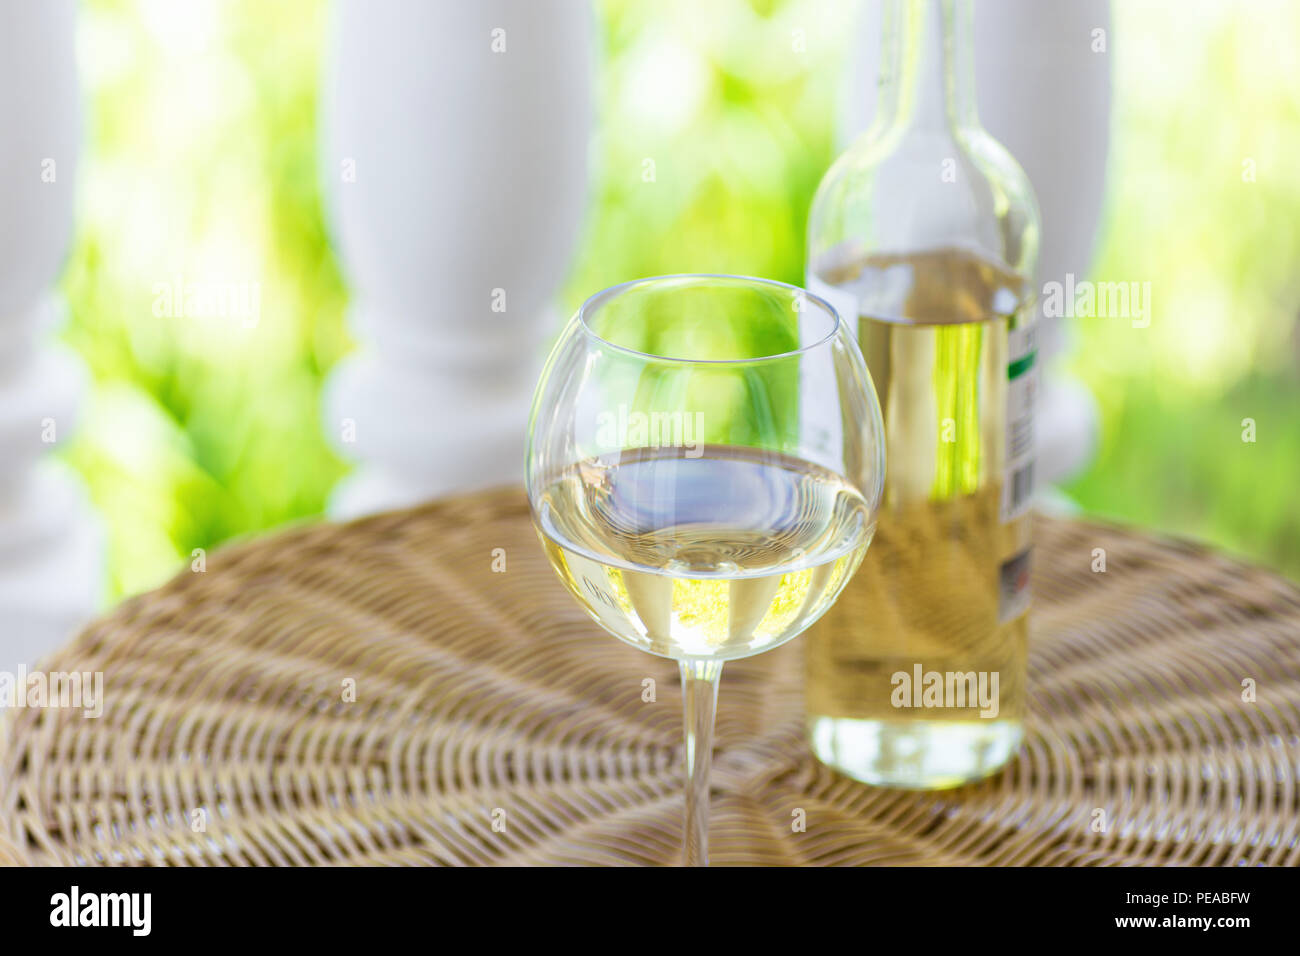 Glass of white dry wine and bottle on wicker table on garden terrace of villa or mansion. Authentic lifestyle image. Relaxation indulgence gourmet. Po Stock Photo